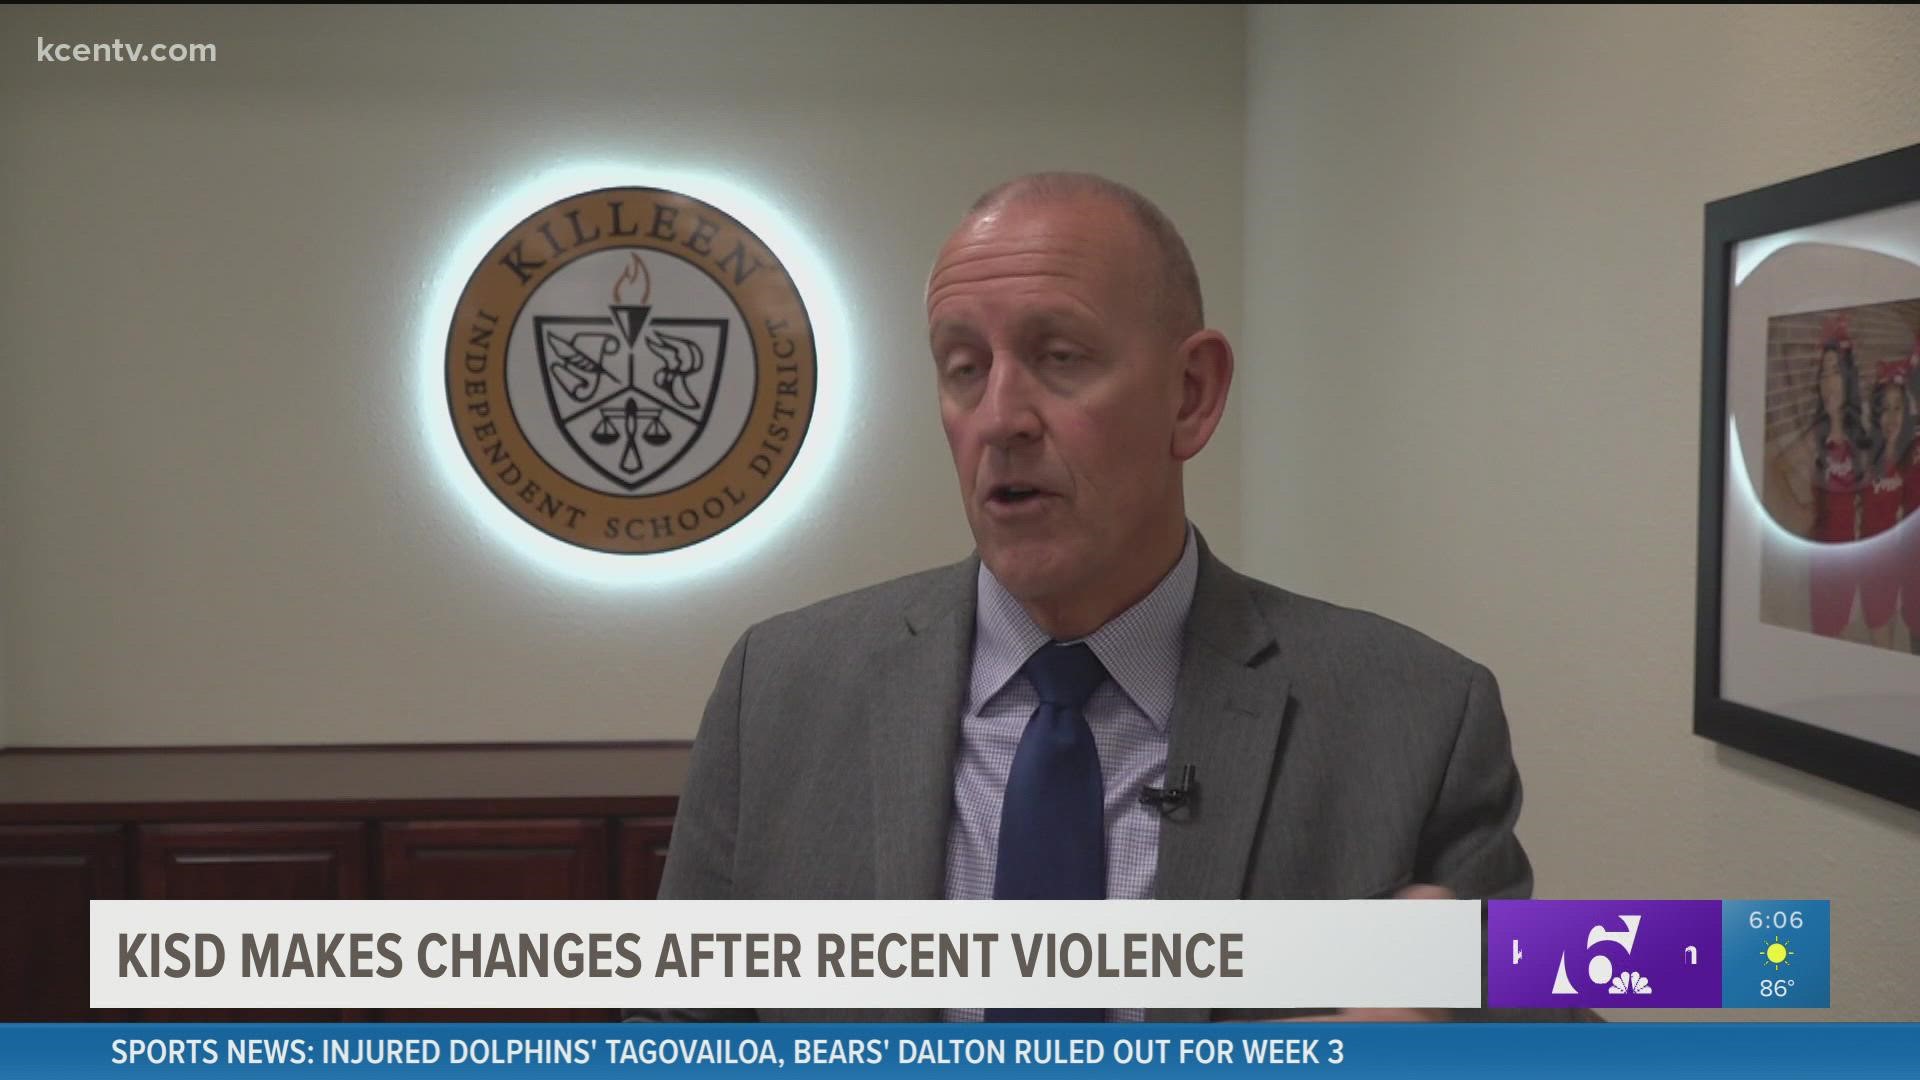 Killeen ISD Police Chief told 6 News they plan to have more officers at each high school campuses where most of the violence occurs.